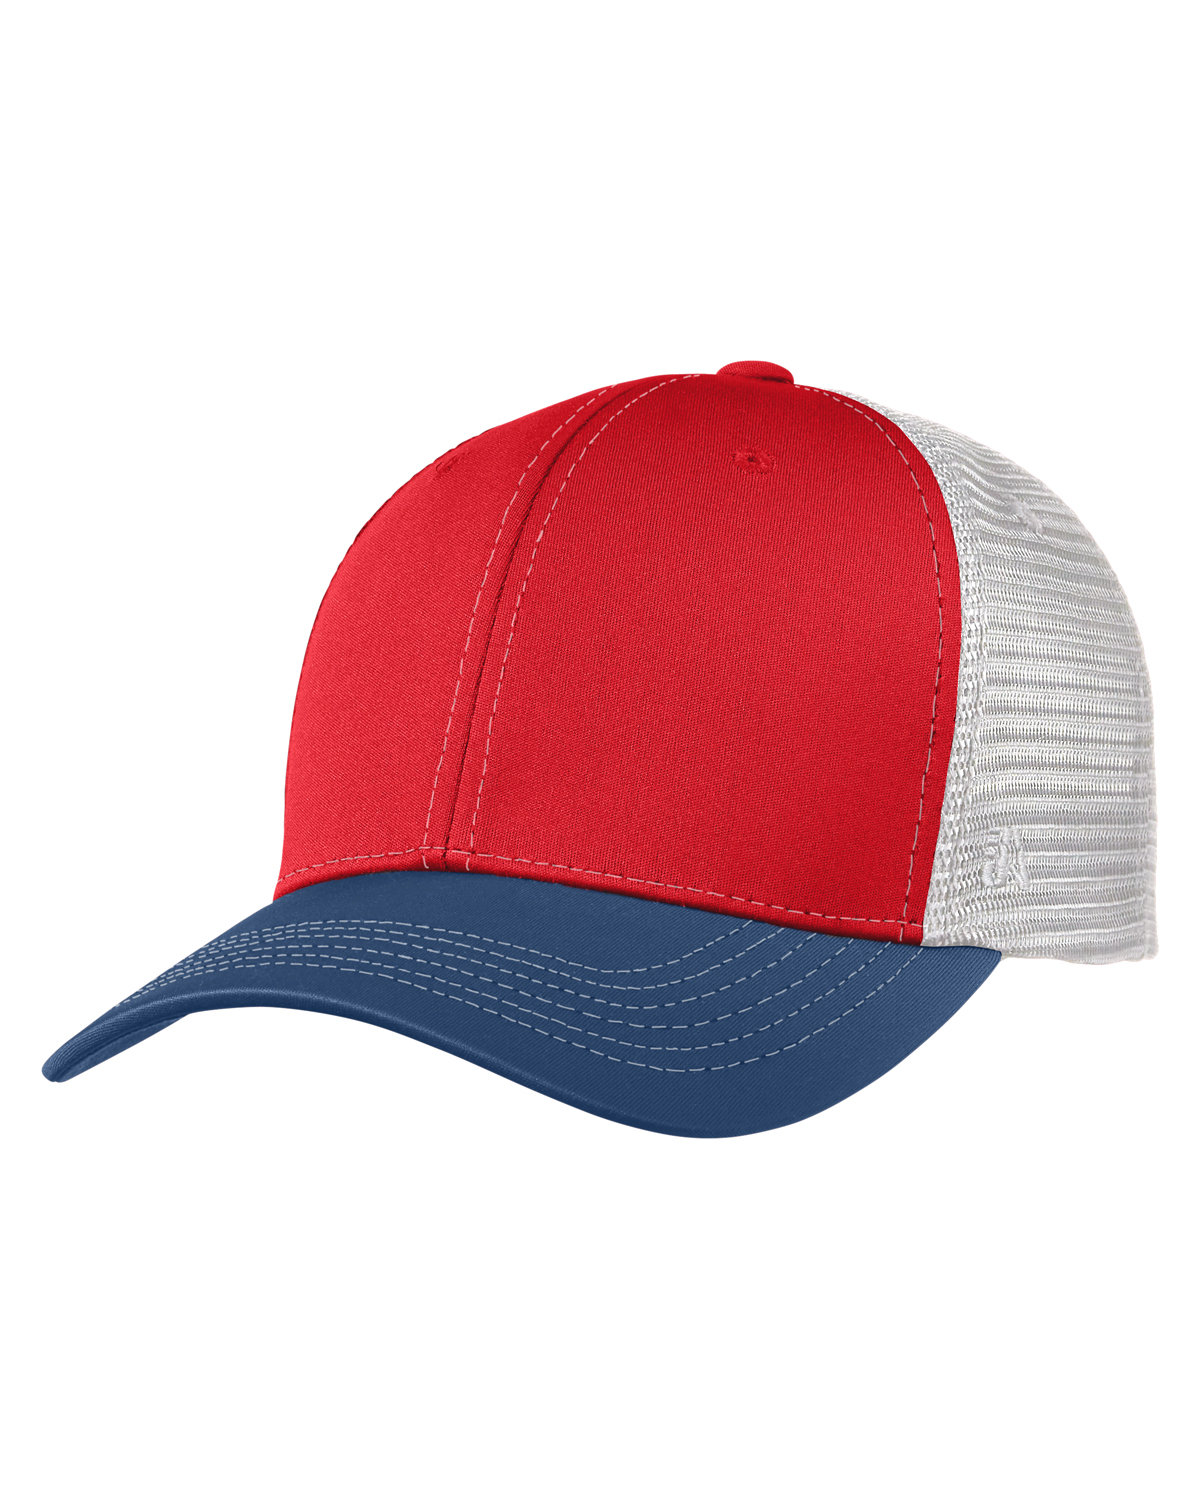 click to view RED/ WHITE/ NAVY